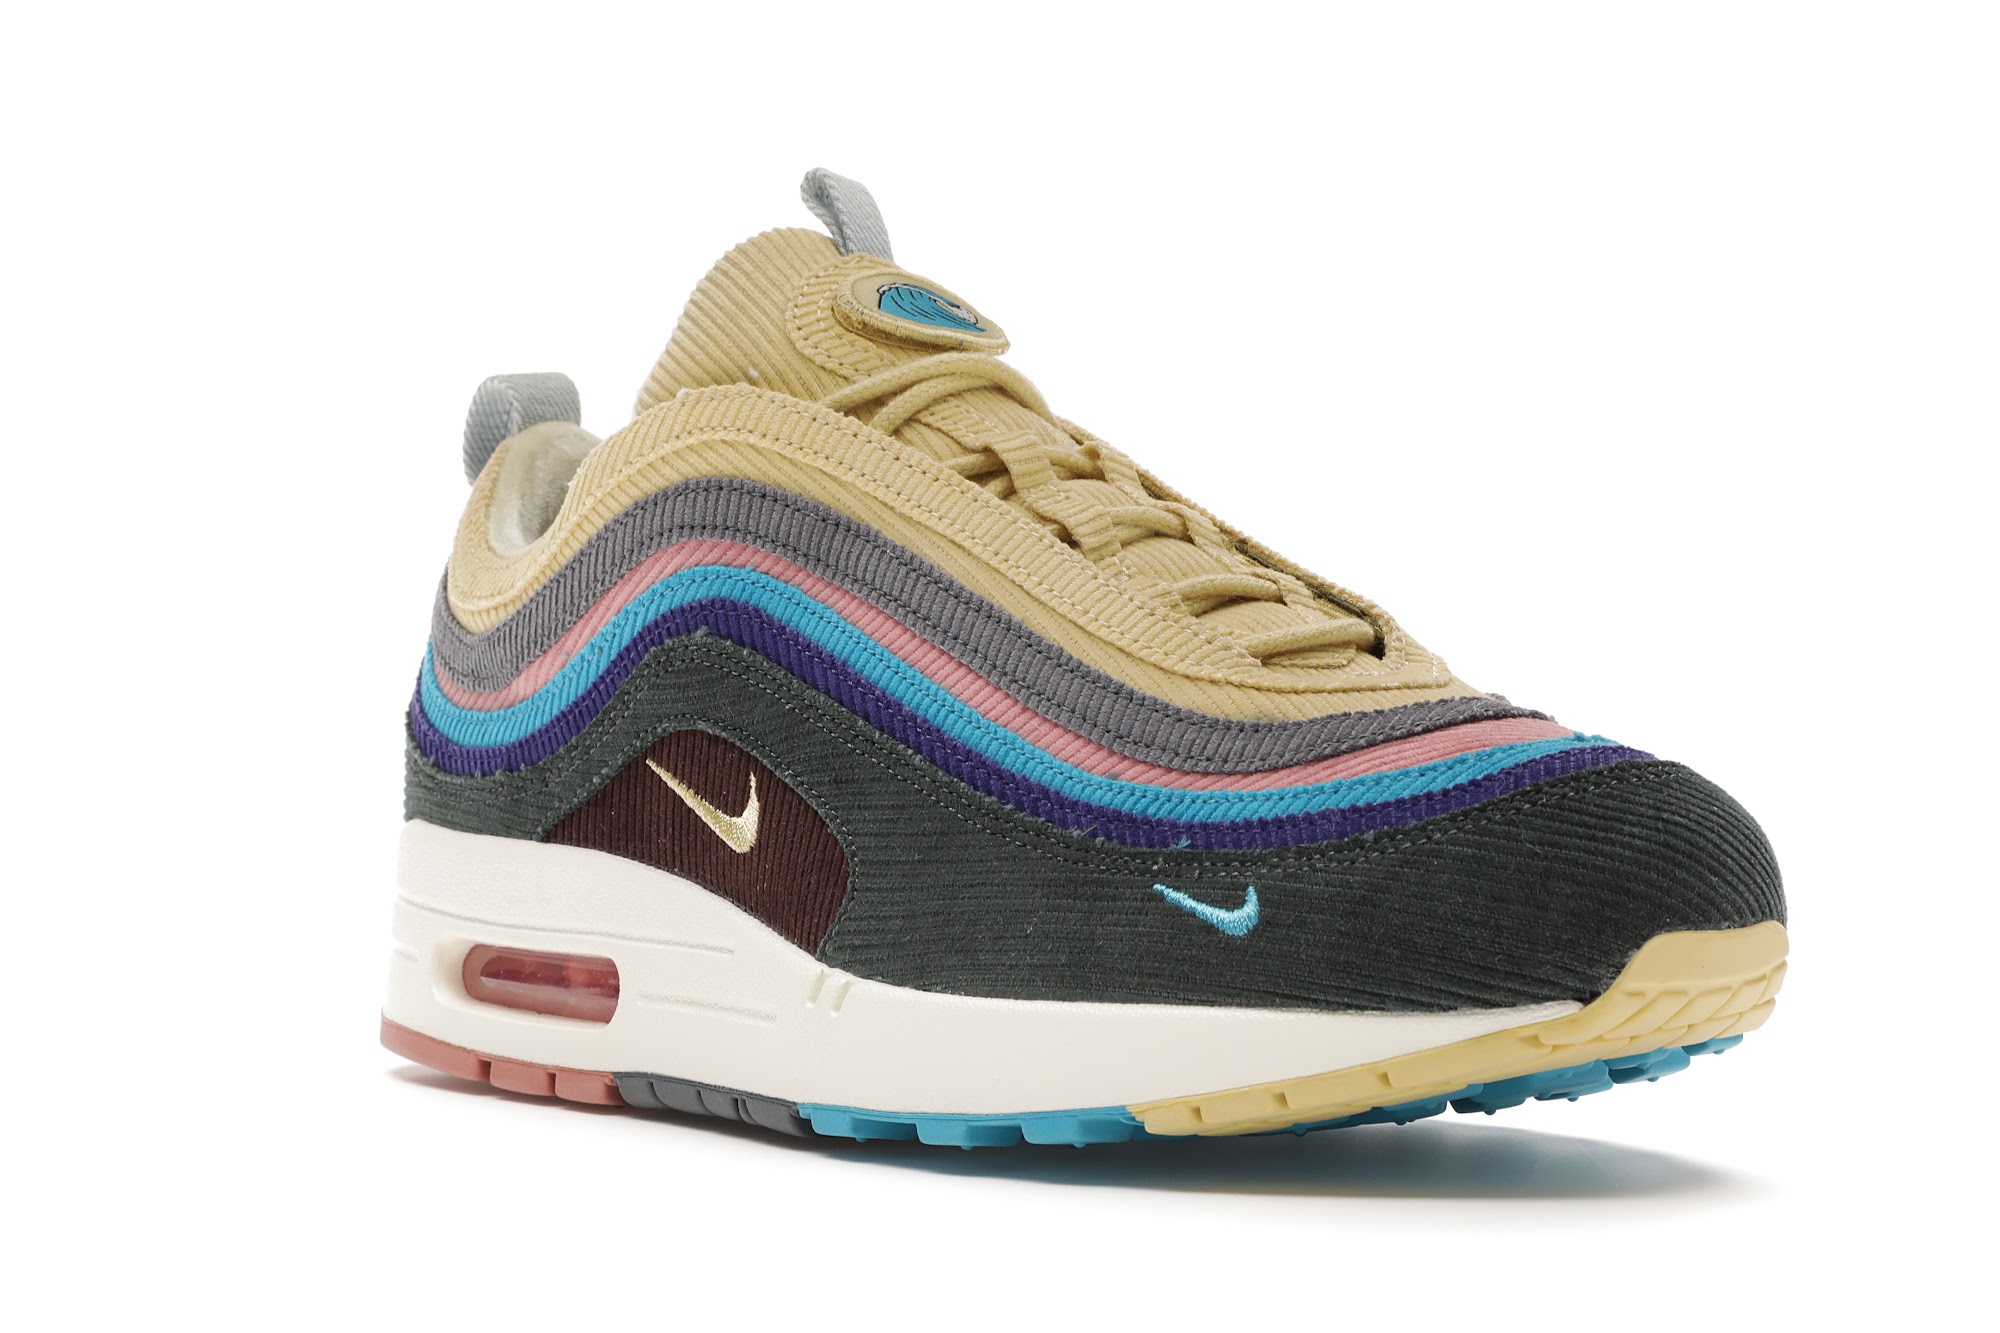 Nike Air Max 1/97 Sean Wotherspoon (All Accessories and Dustbag)